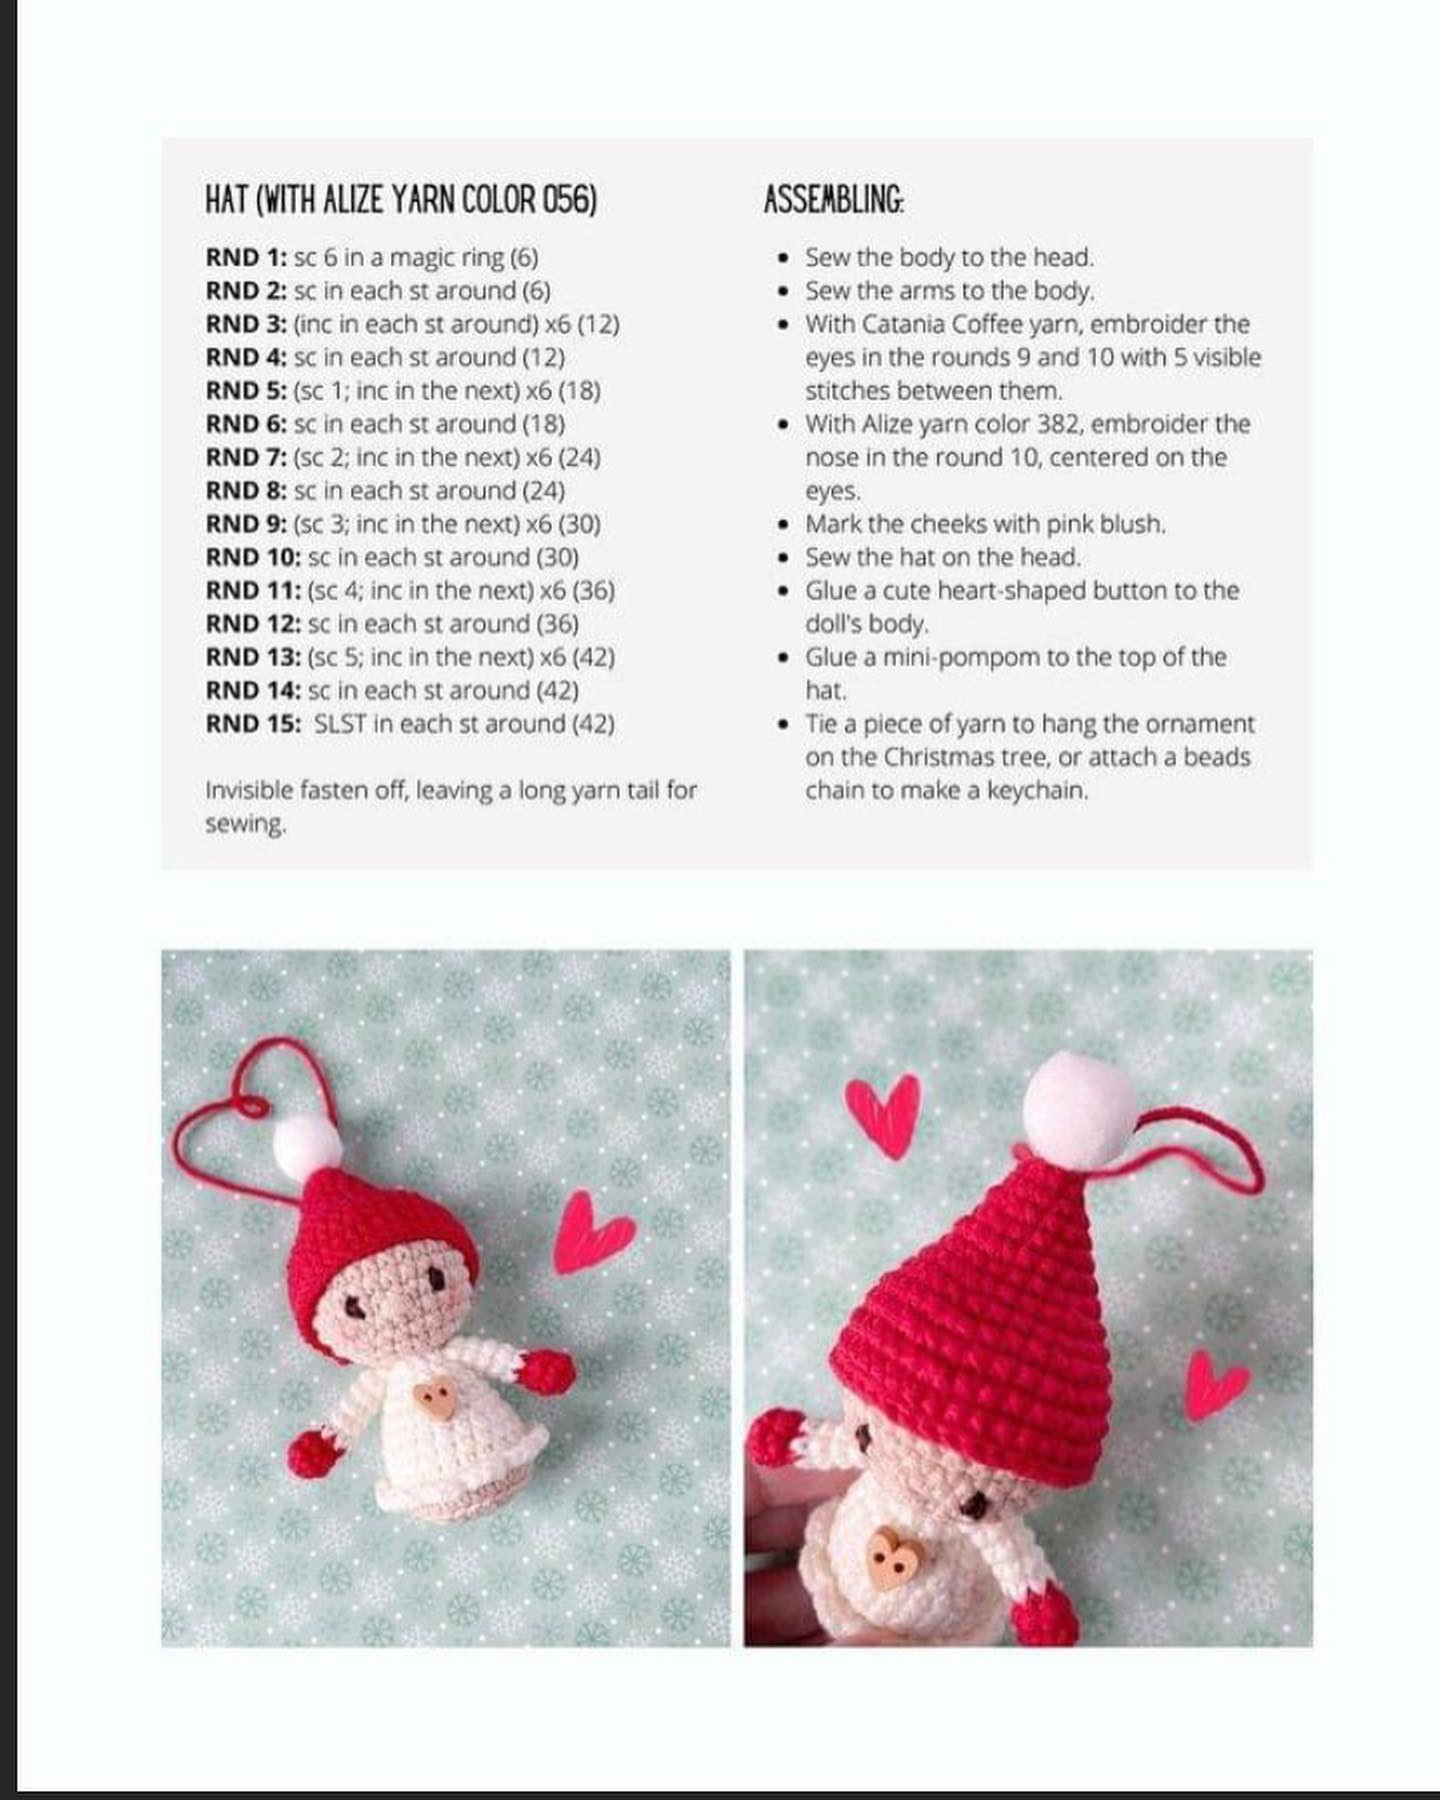 Crochet pattern for a doll wearing a white dress and a red hat.